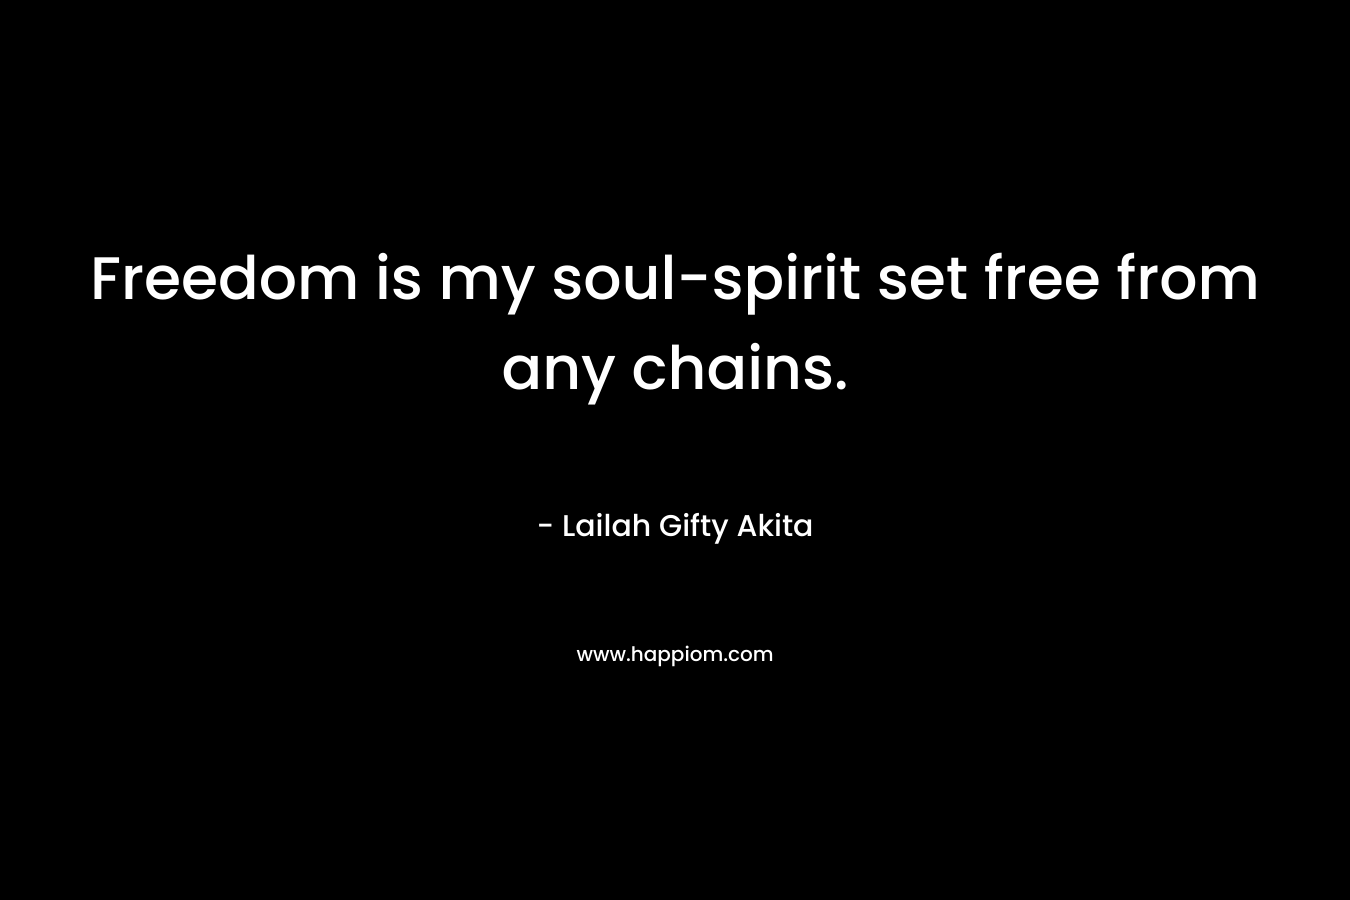 Freedom is my soul-spirit set free from any chains. – Lailah Gifty Akita